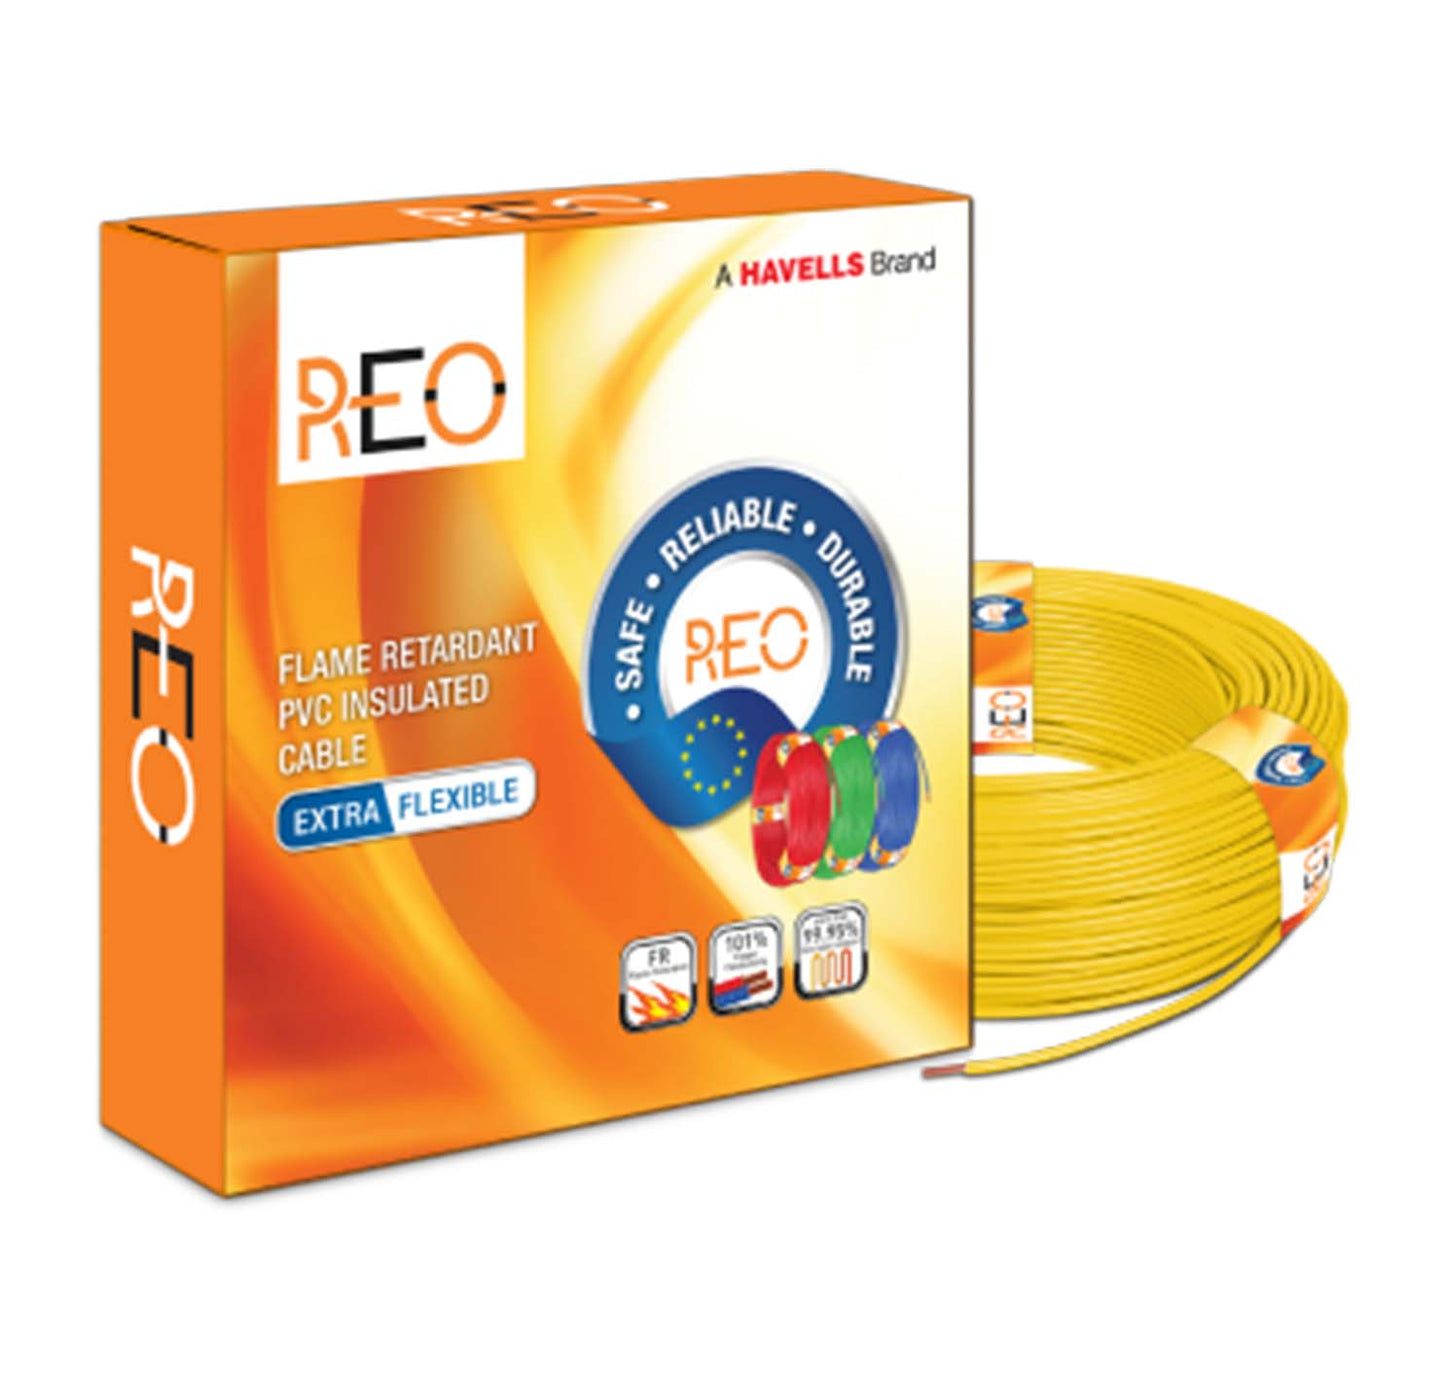 Havells Reo Flame Retardant PVC Insulated Cable - Yellow